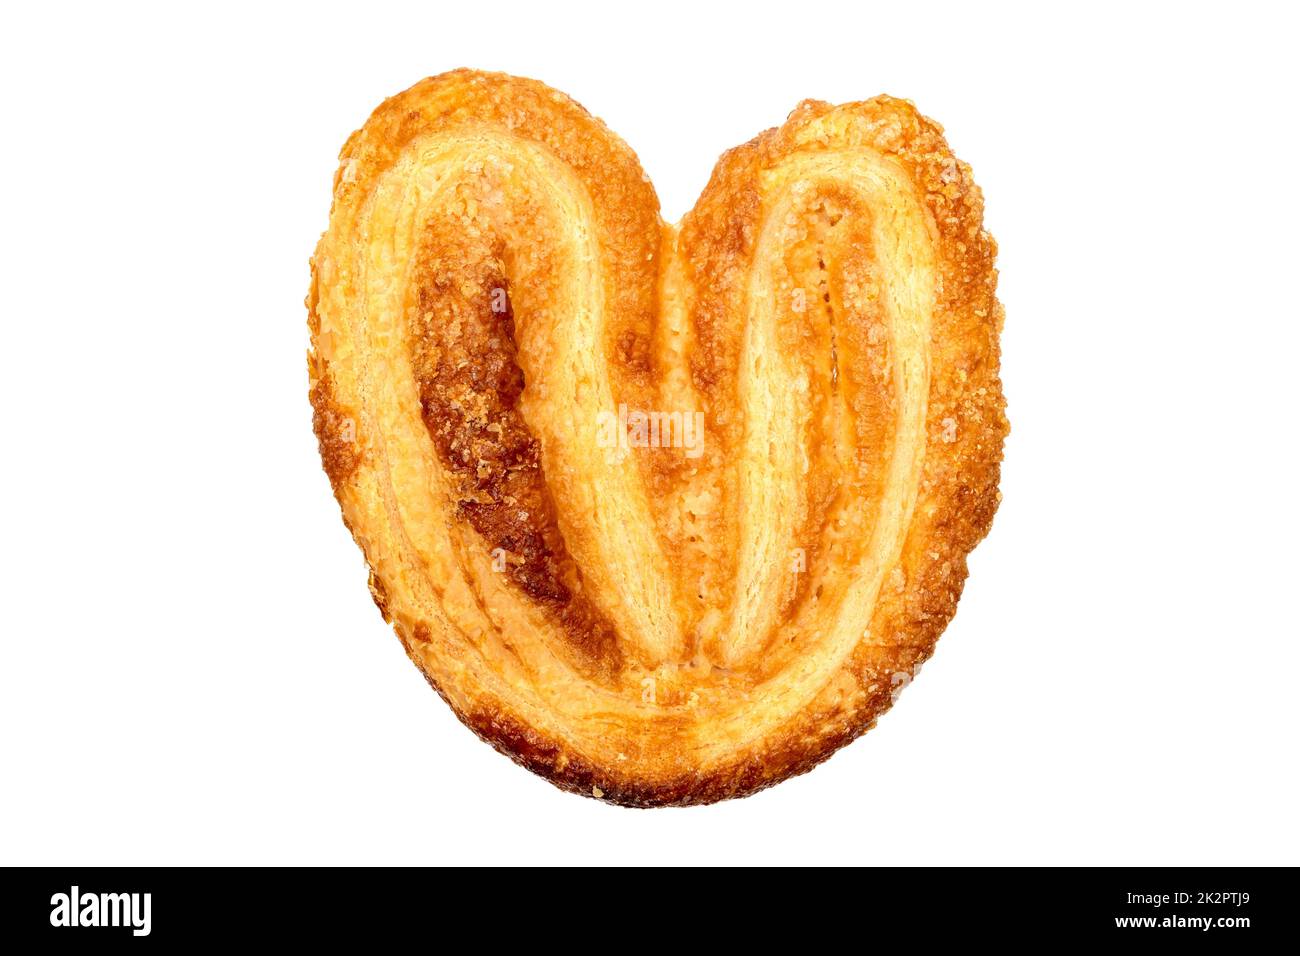 Butterfly Puff Pastry or Palmier Cookie Stock Photo